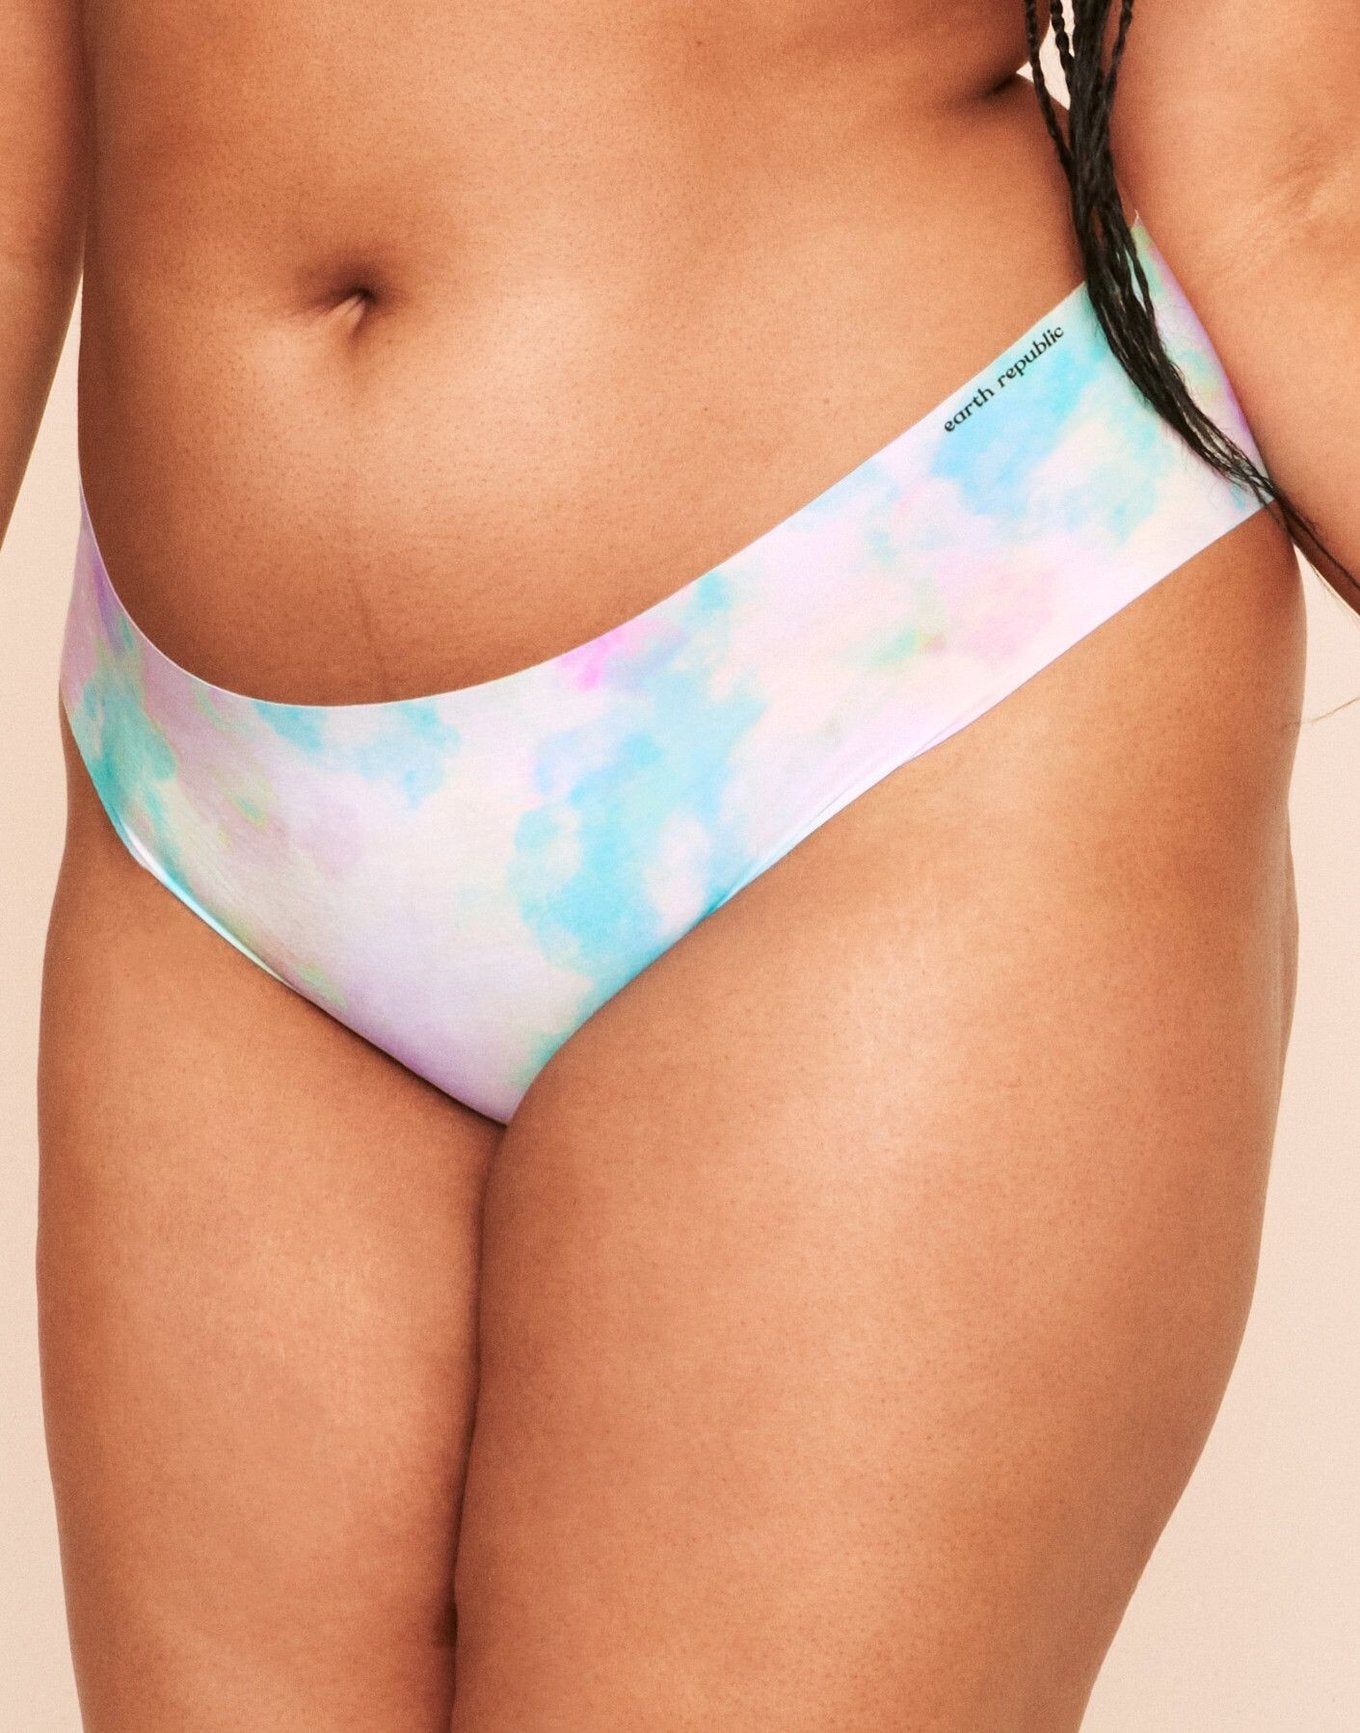 Earth Republic Marlowe Clean Cut Clean Cut Cheeky in color Smudged Unicorn and shape cheeky